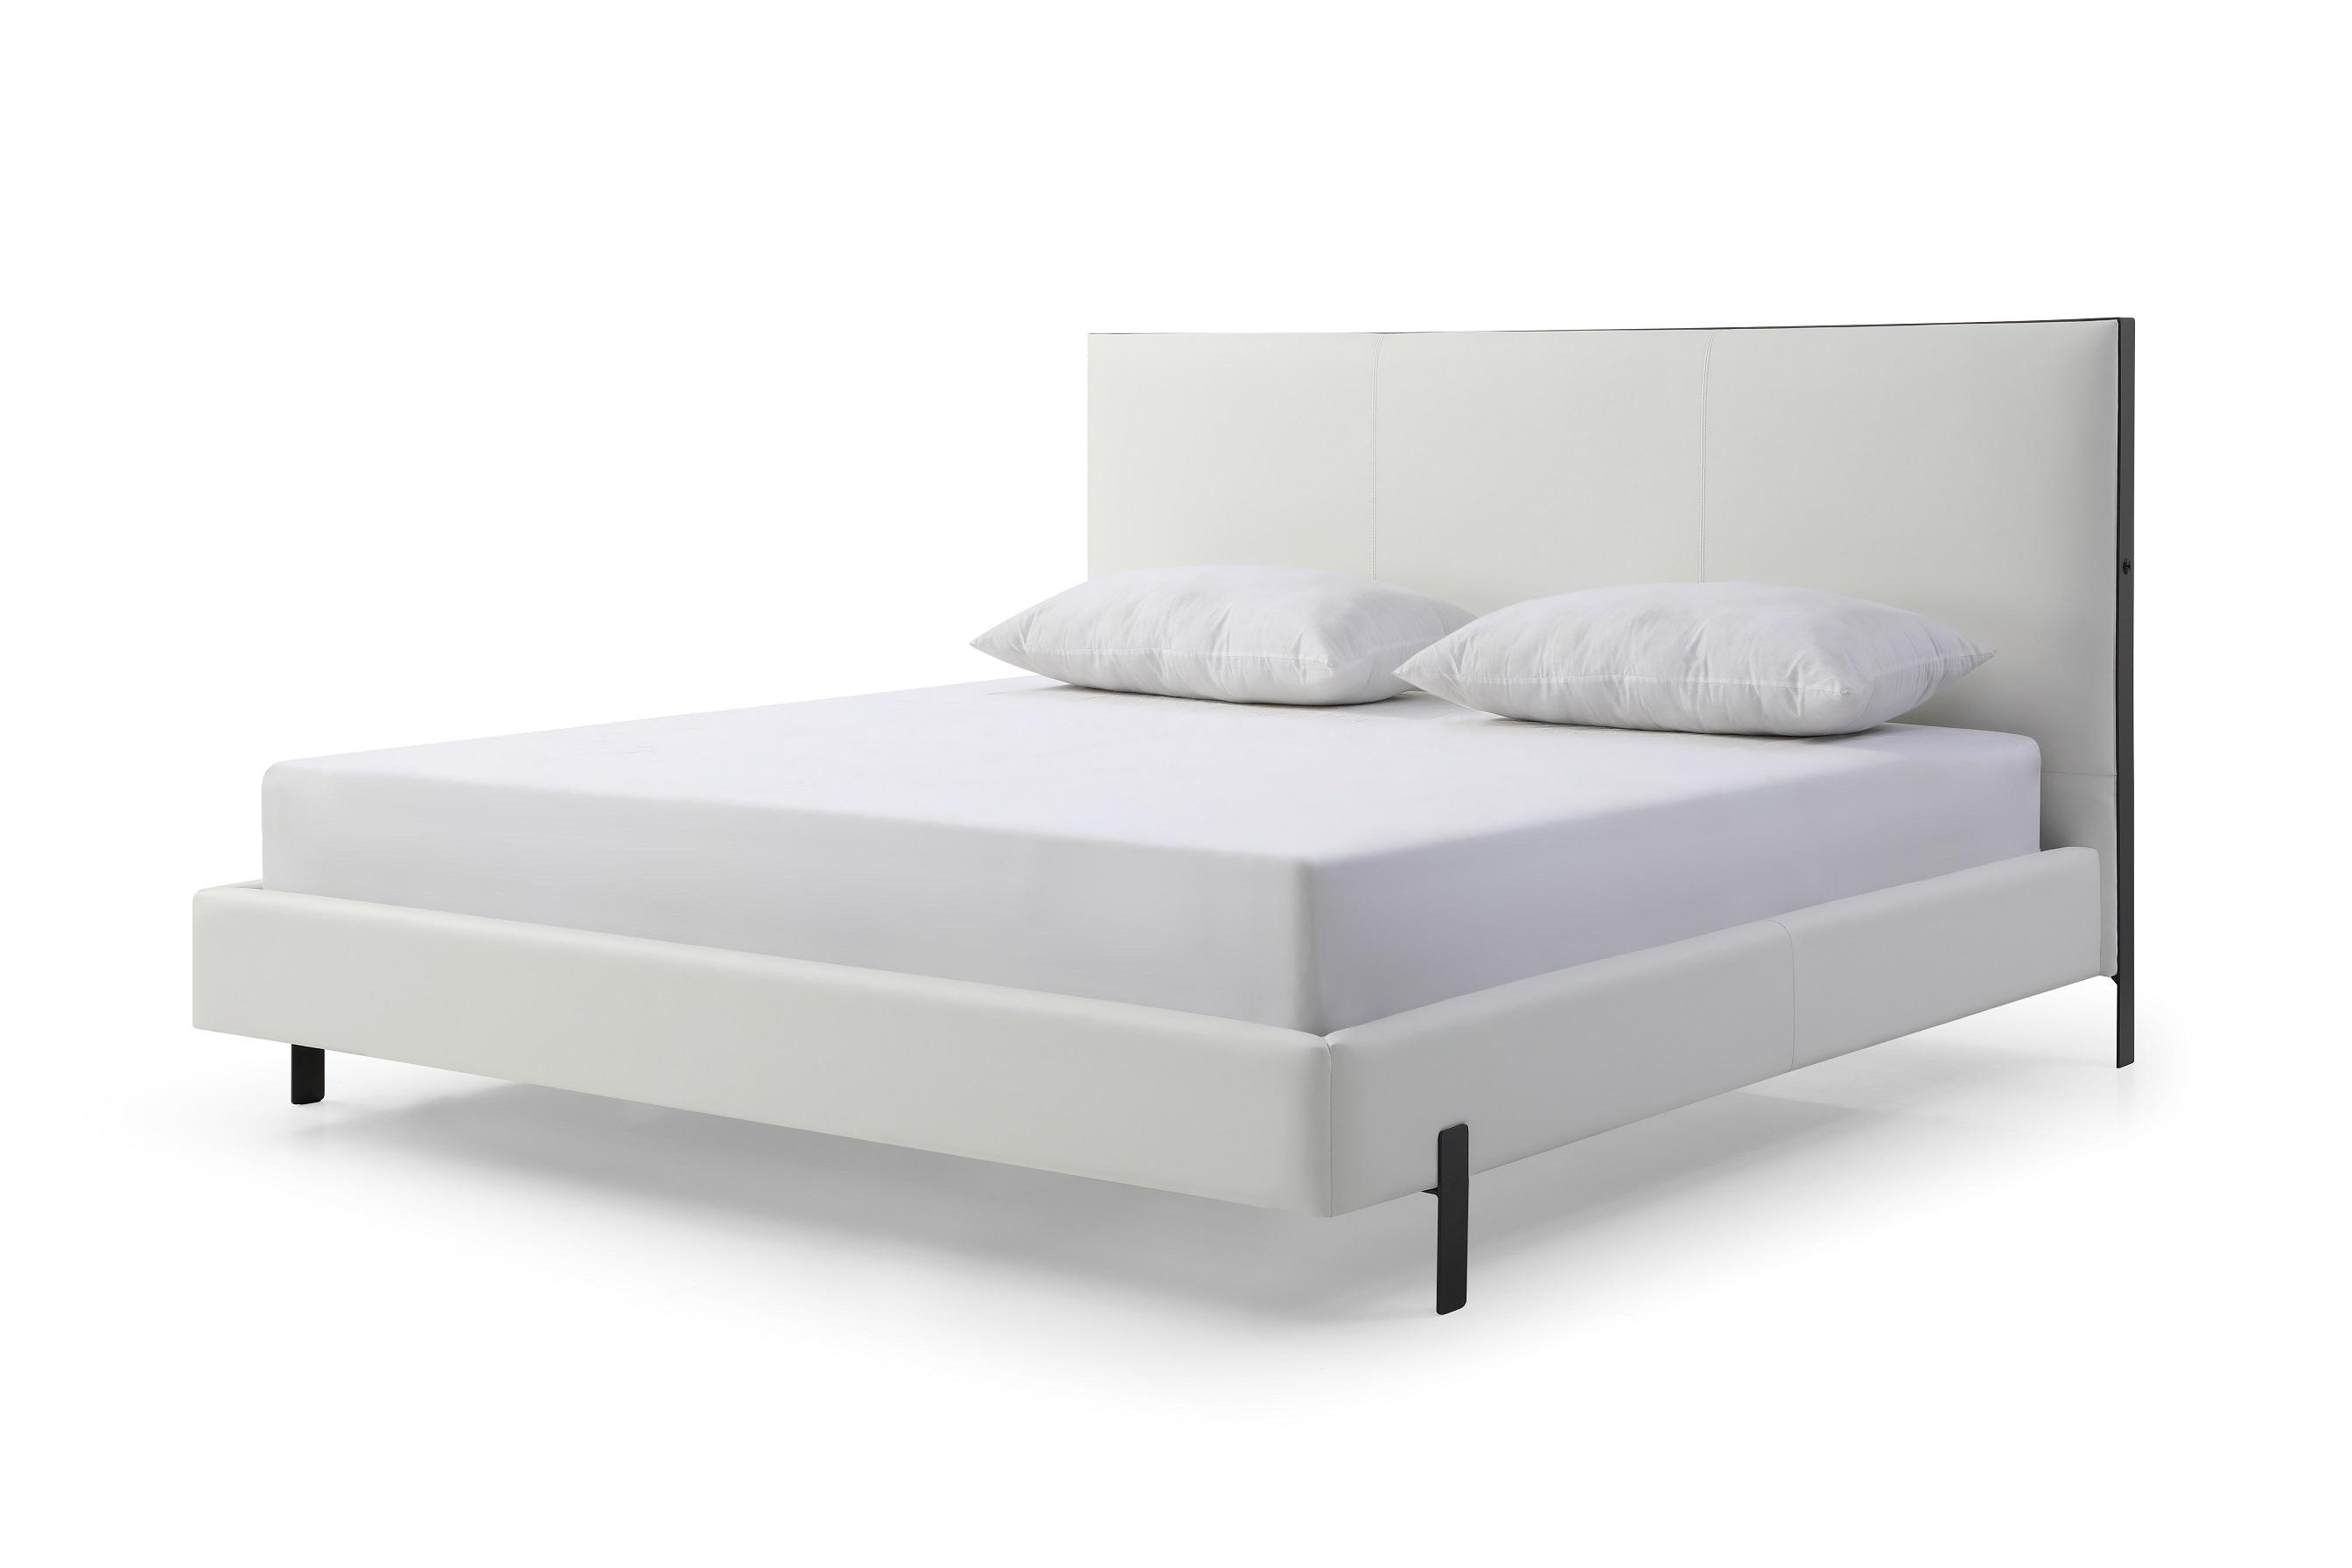 Modern Bed BQ1690P-WHT Hollywood BQ1690P-WHT in White Faux Leather